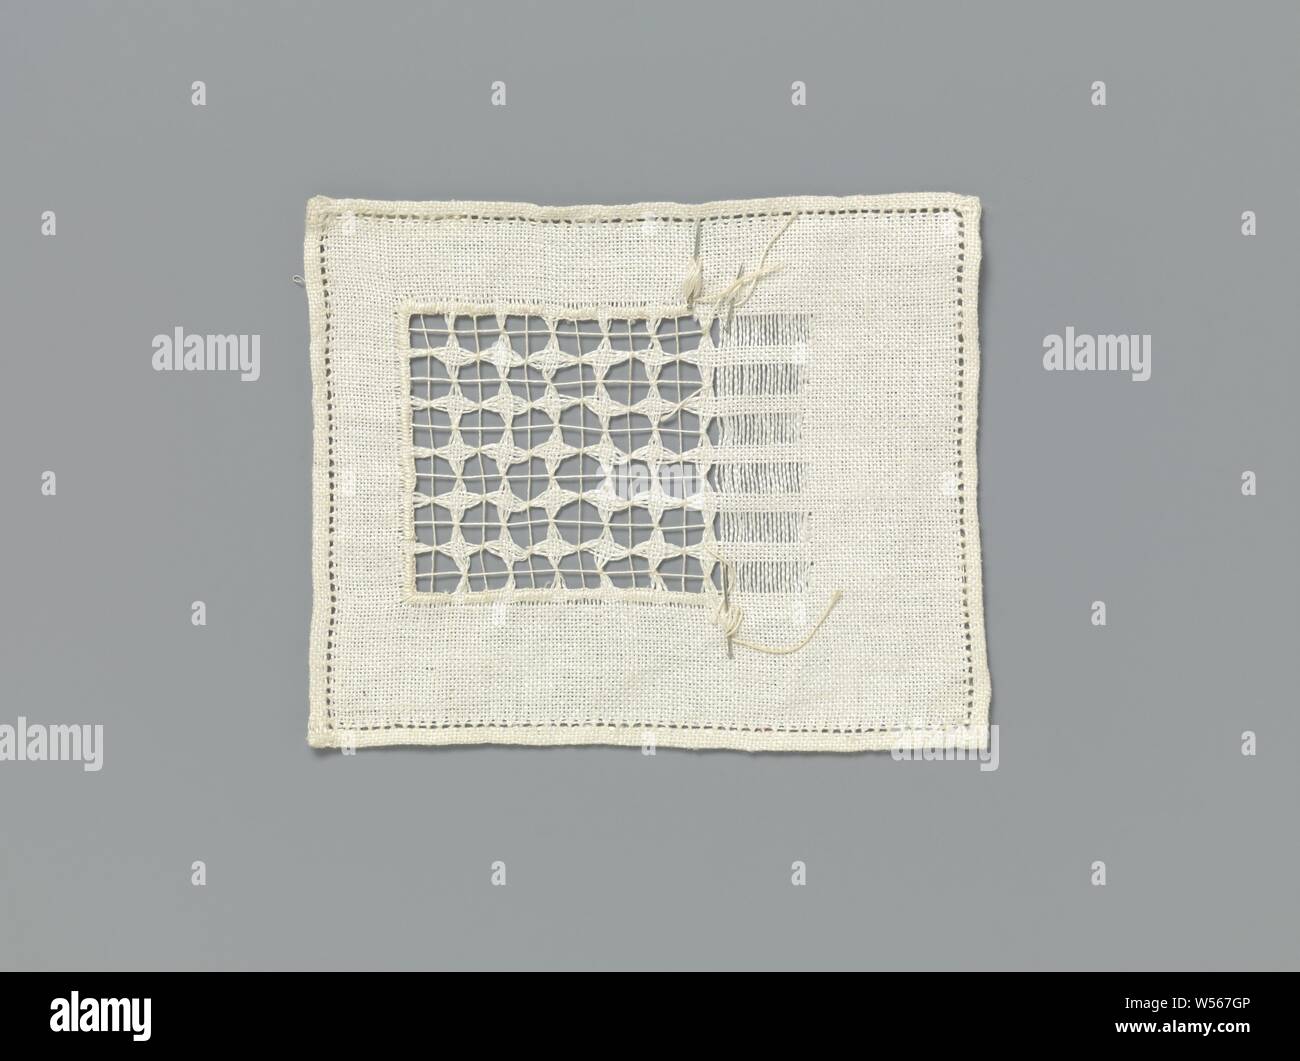 Steel linen with lace embroidery with pulled-out threads and four-pointed stars in a square grid, Steel natural-colored linen with lace embroidery: work with pulled-out threads. Study material. In a considerable part of the linen a square grid has been created by pulling out threads in the horizontal and vertical directions. With an added thread a start has been made with bundling the remaining threads that form the grid and finishing the edges around the grid with festival stitches. The bundling is carried out in horizontal and vertical lines, the added thread thus forms its own square grid Stock Photo